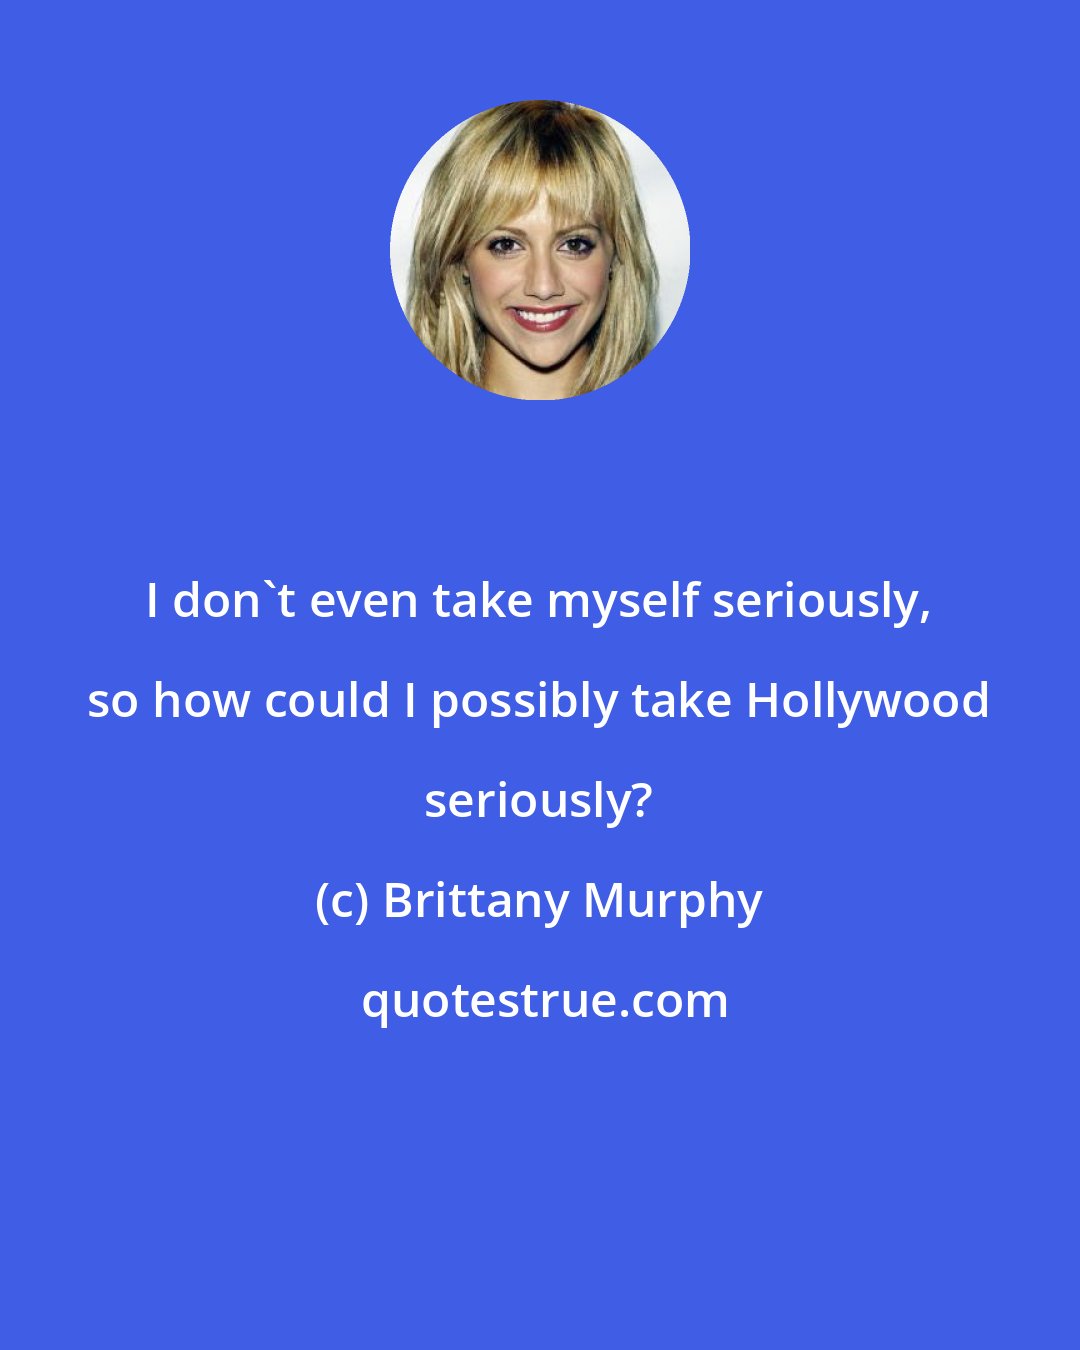 Brittany Murphy: I don't even take myself seriously, so how could I possibly take Hollywood seriously?